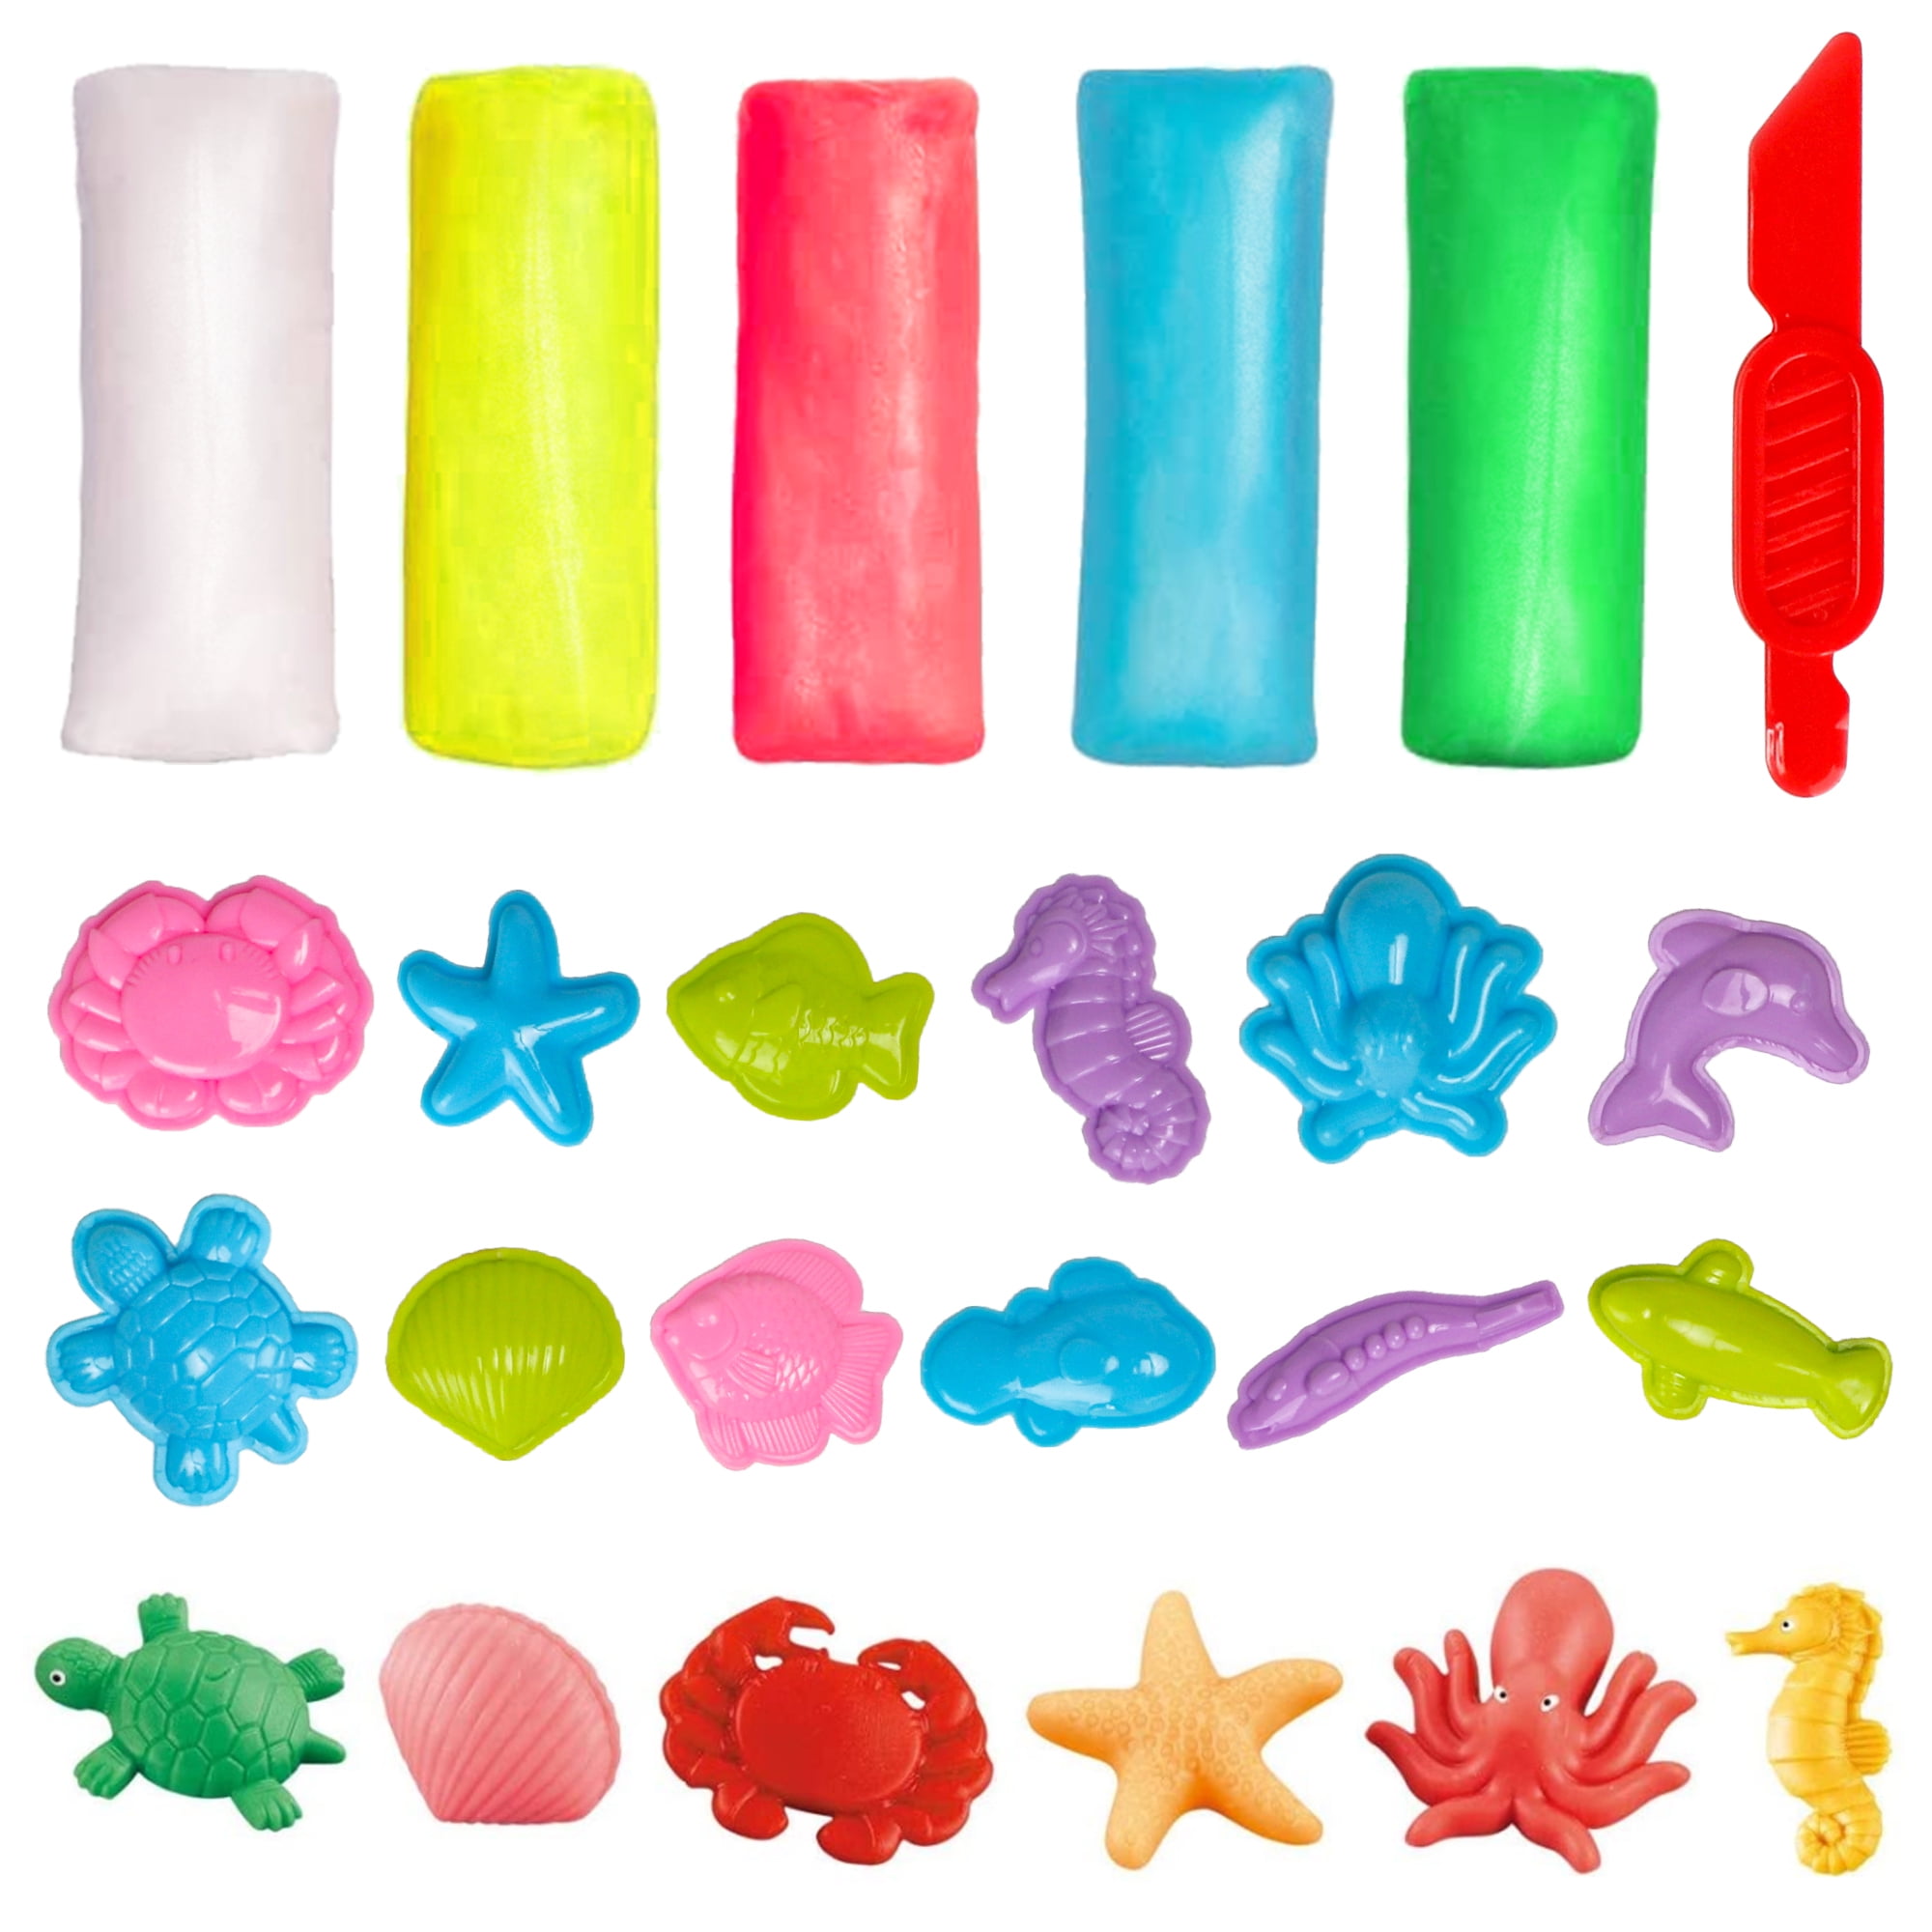 Shop Soft Clay For Slime online